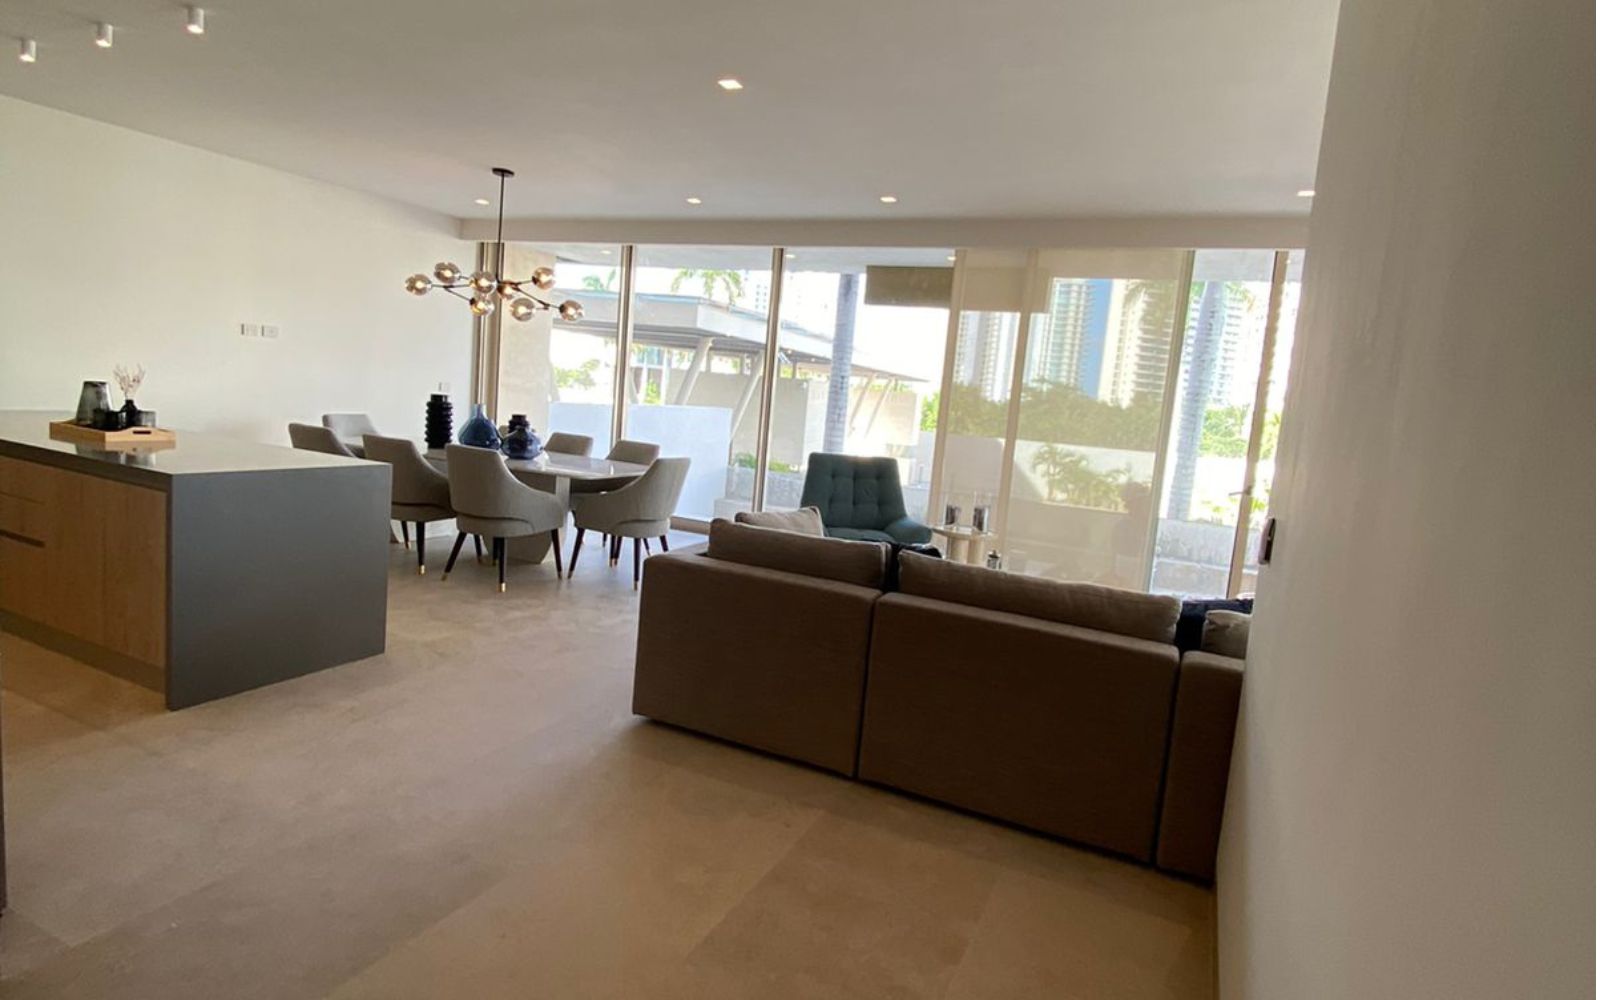 2-bedroom condominium with panoramic terrace for sale Cancun.